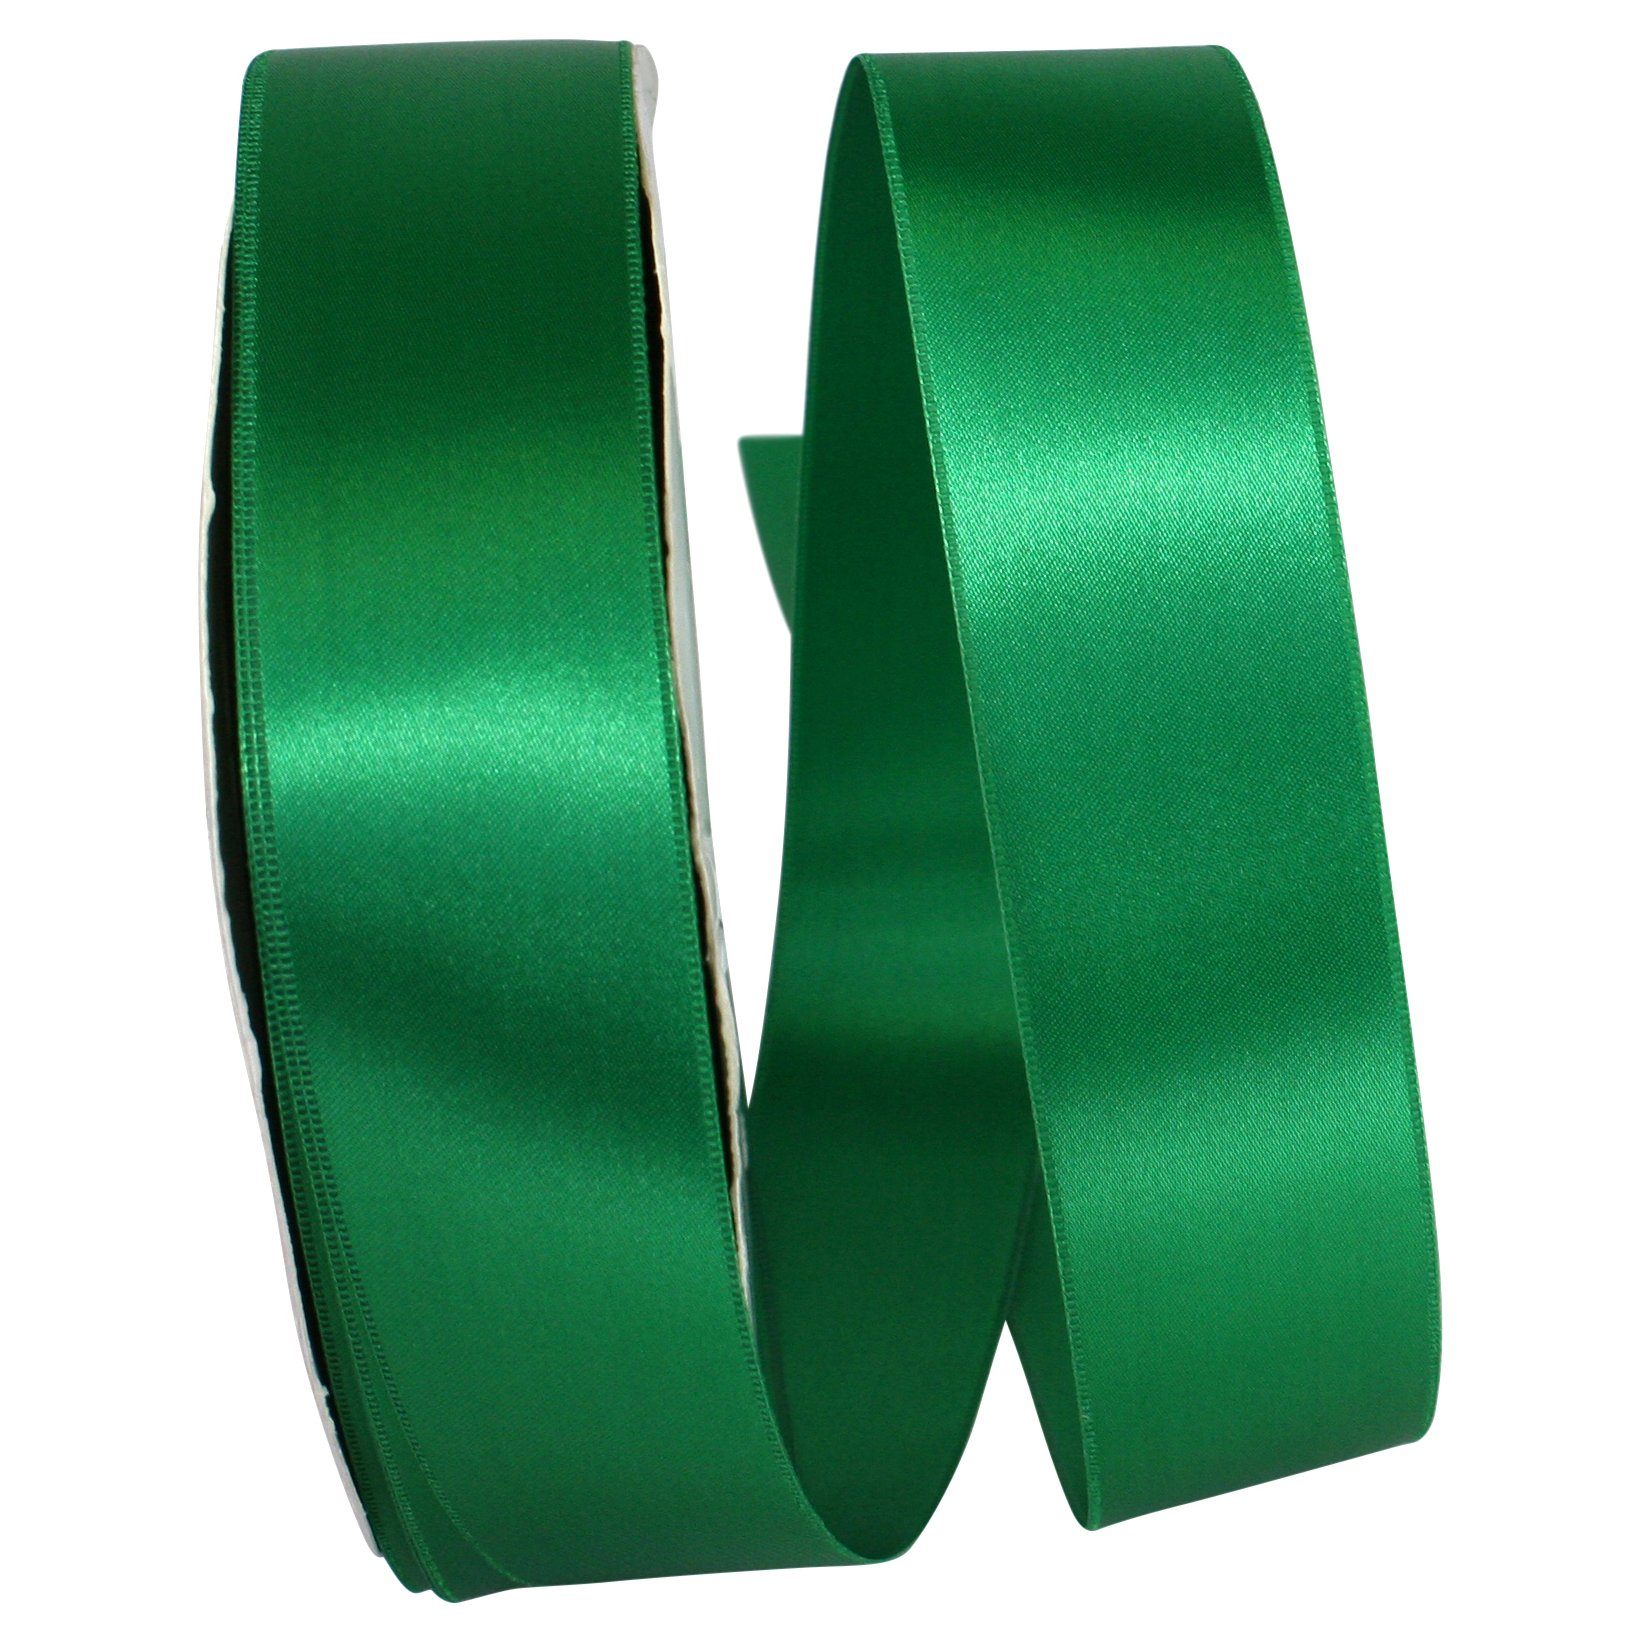 Knitial Satin Green Ribbon 1-1/2 inch x 50 Yards Double Face for Gift Wrapping and Crafts